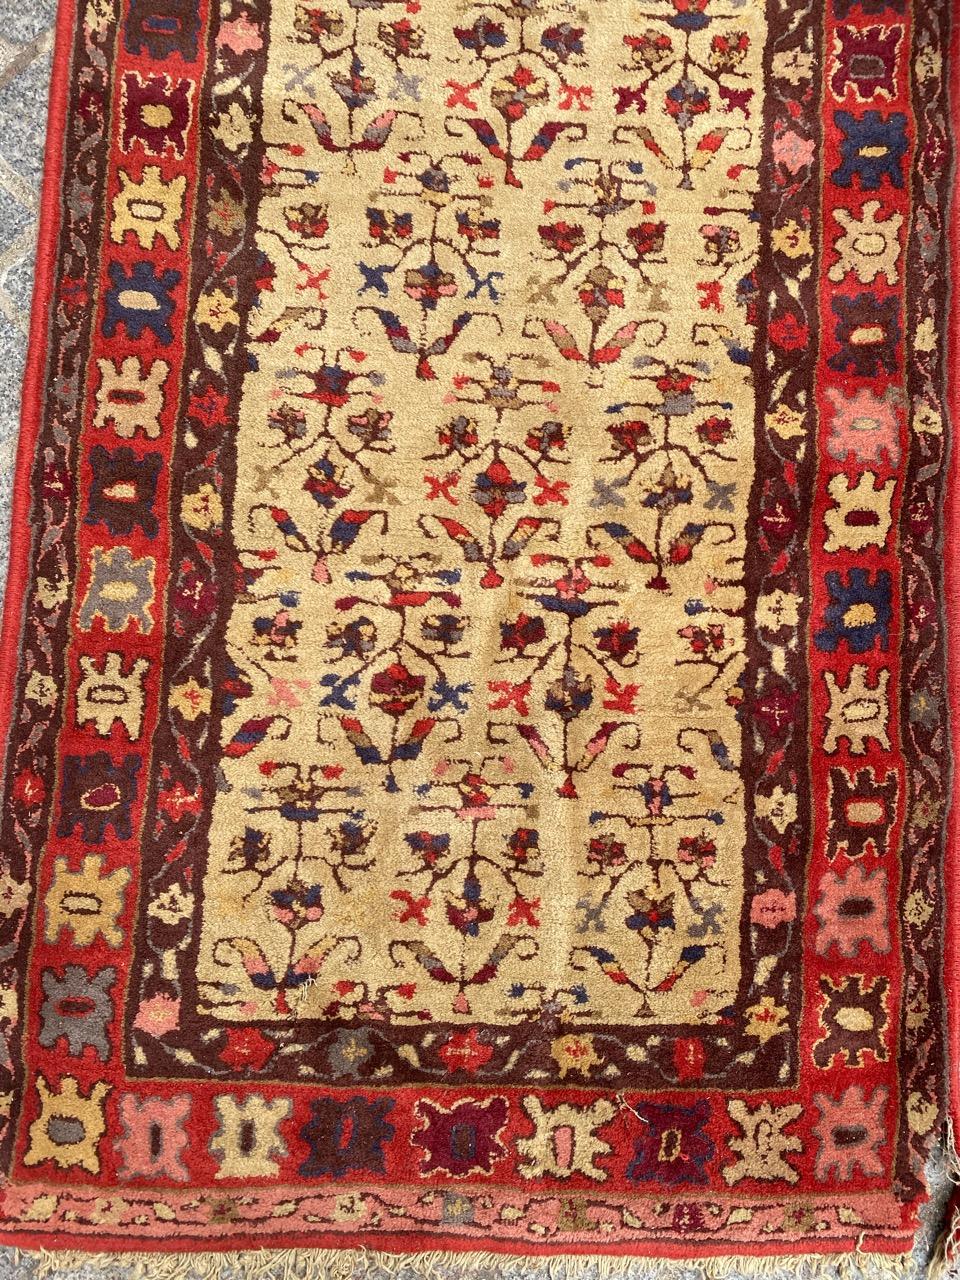 Nice French runner with beautiful Persian design and beautiful colors, entirely hand crafted with wool on cotton foundation.